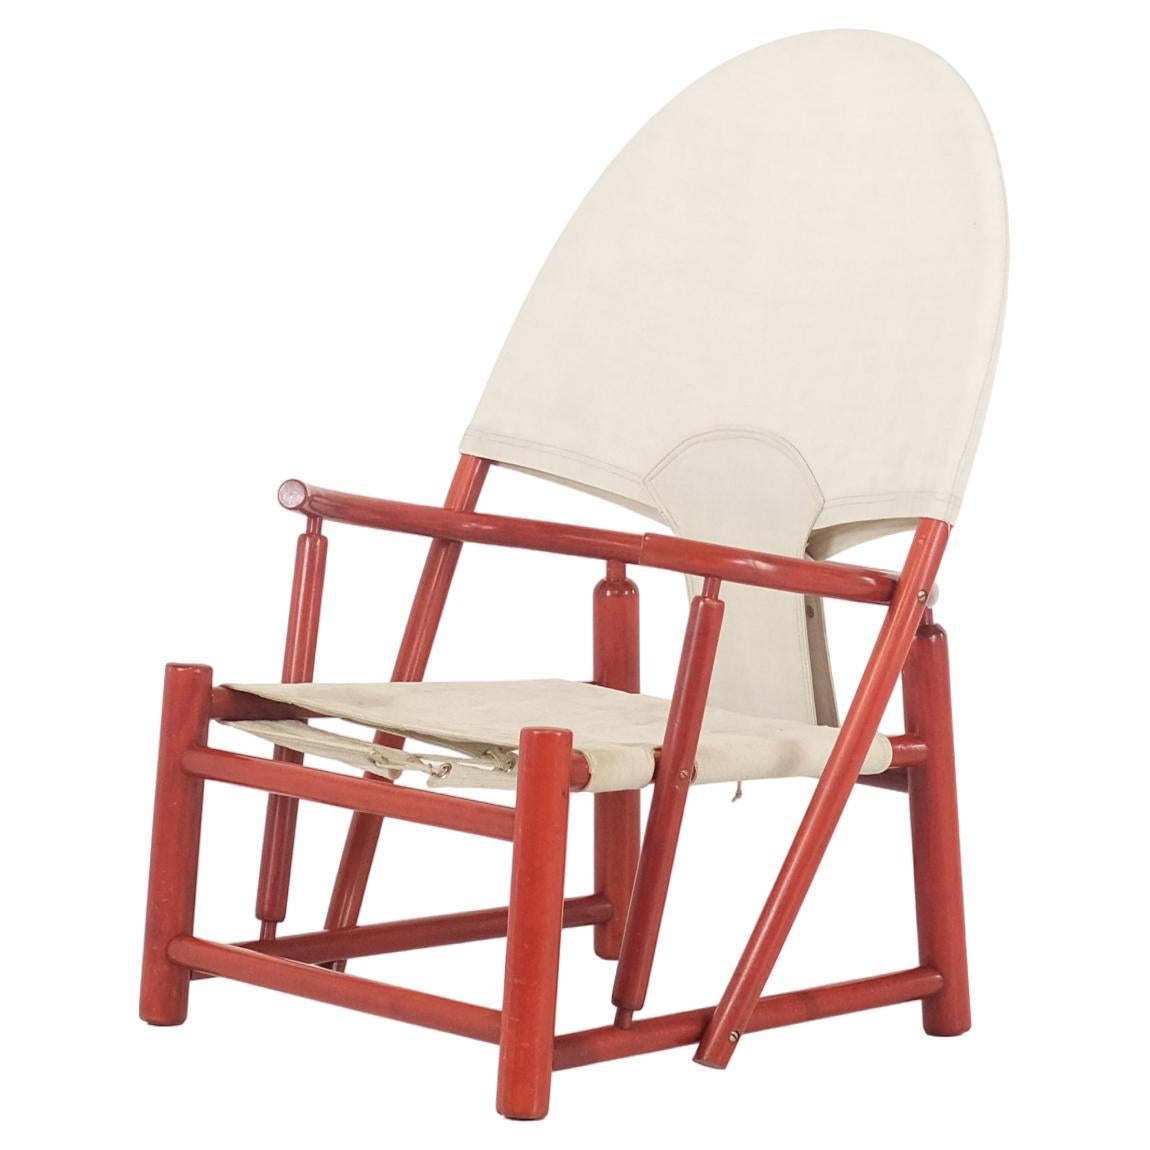 Hoop Chair by Piero Palange & Werther Toffoloni for Germa - 1970s For Sale